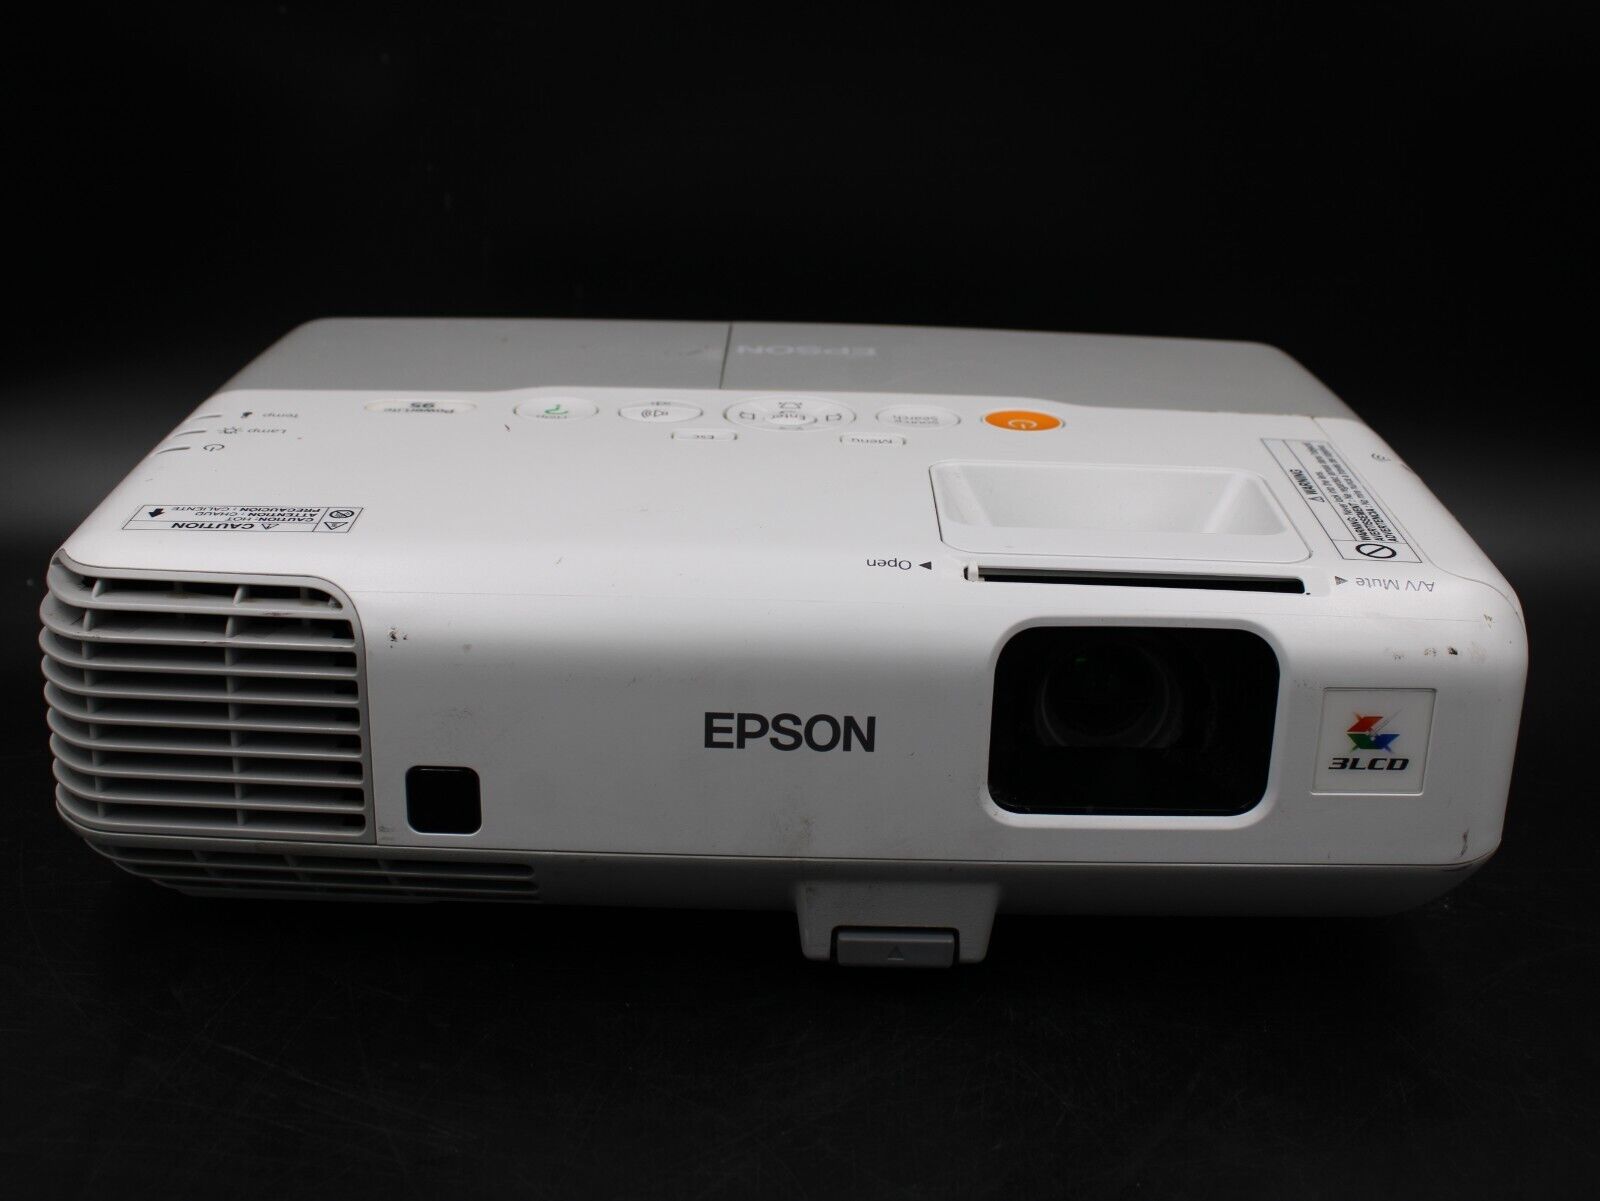 Epson Powerlite 95 XGA 3LCD HDMI Projector 2000-2999 Lamp Hours TESTED